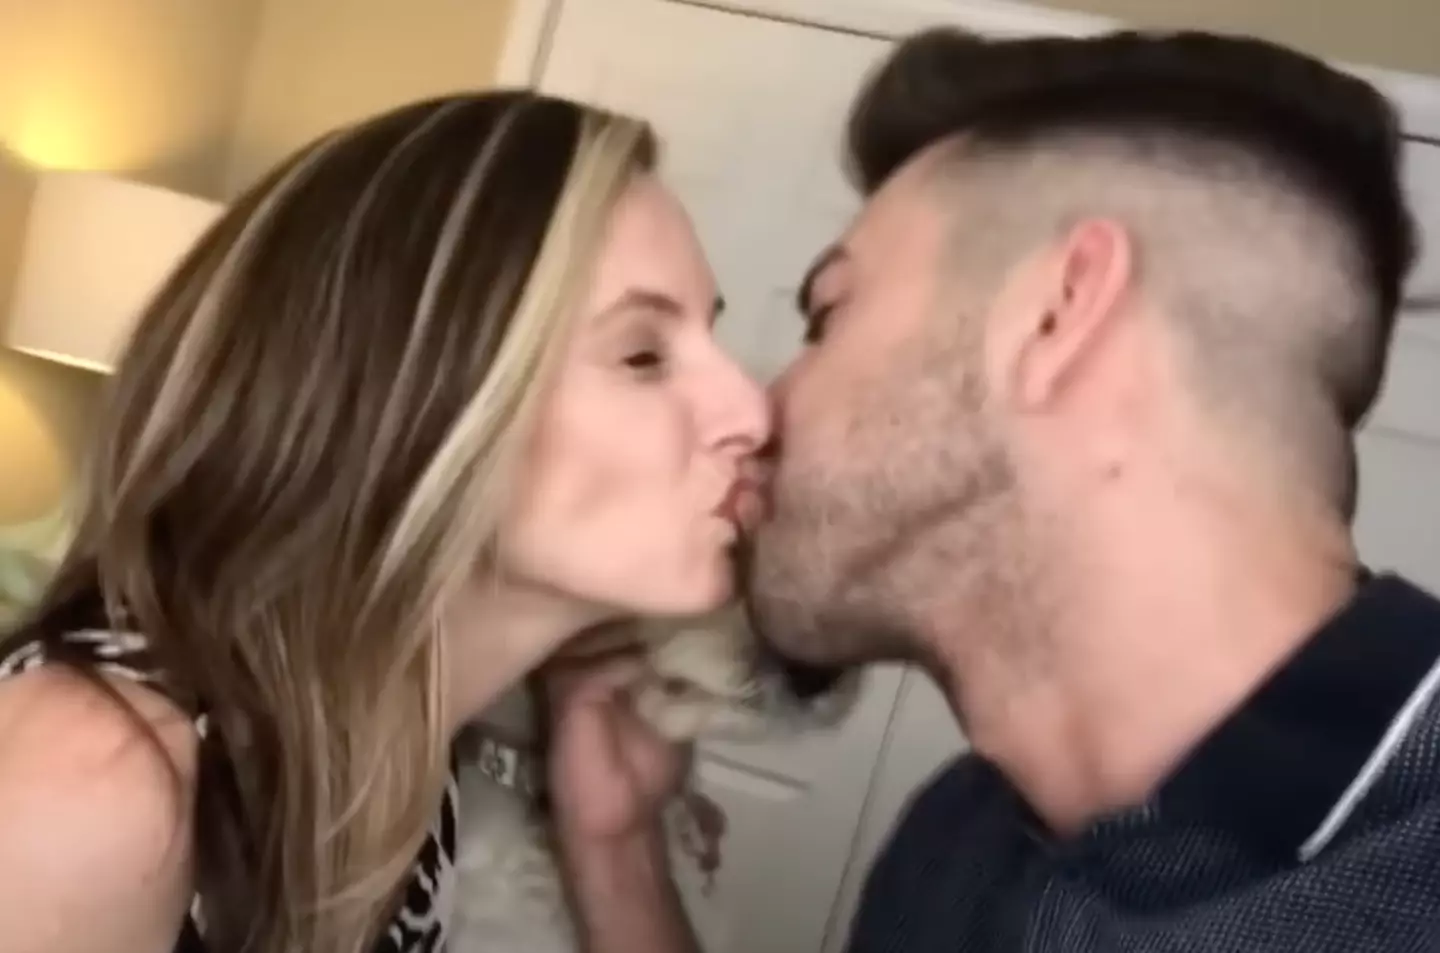 Prank Invasion didn't hold back when kissing his mom and sister. (YouTube/prankinvasion)